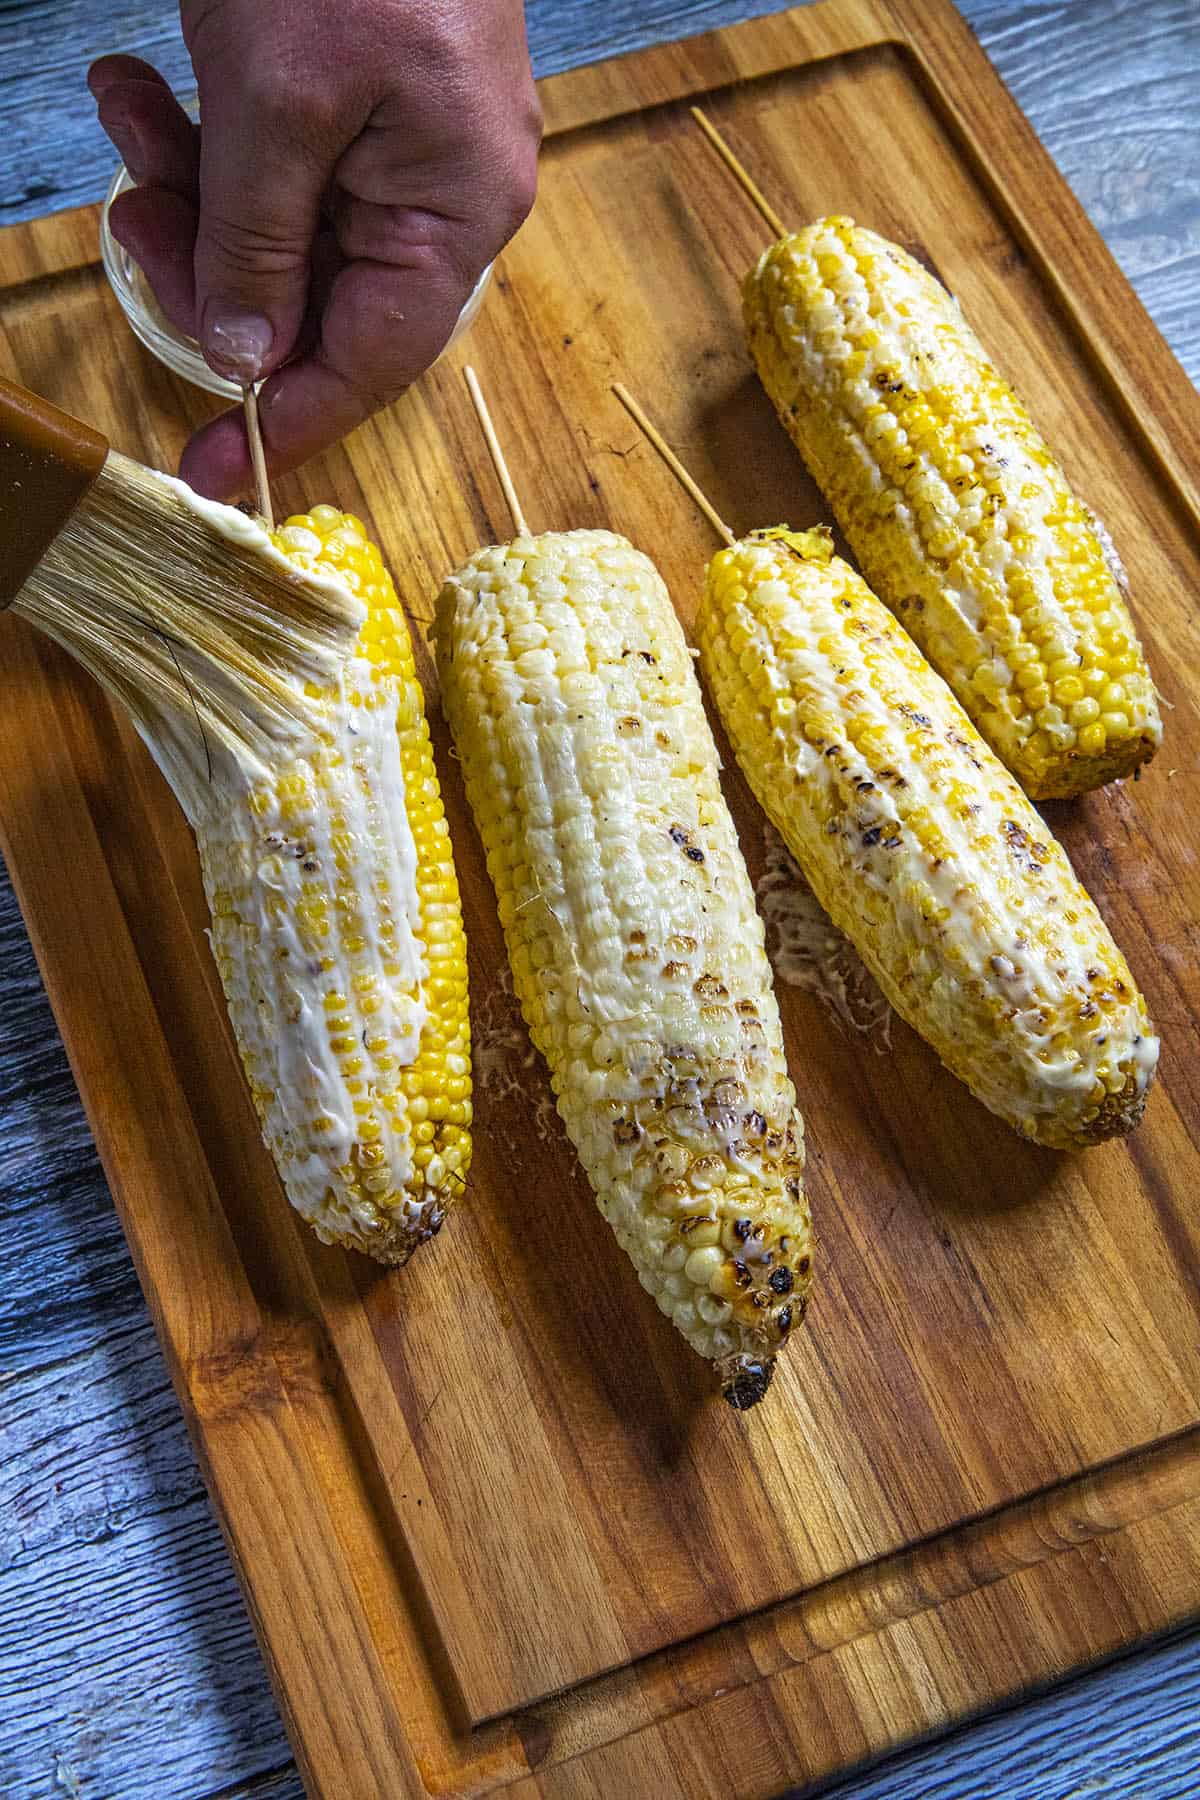 Coating the grilled corn with mayonnaise